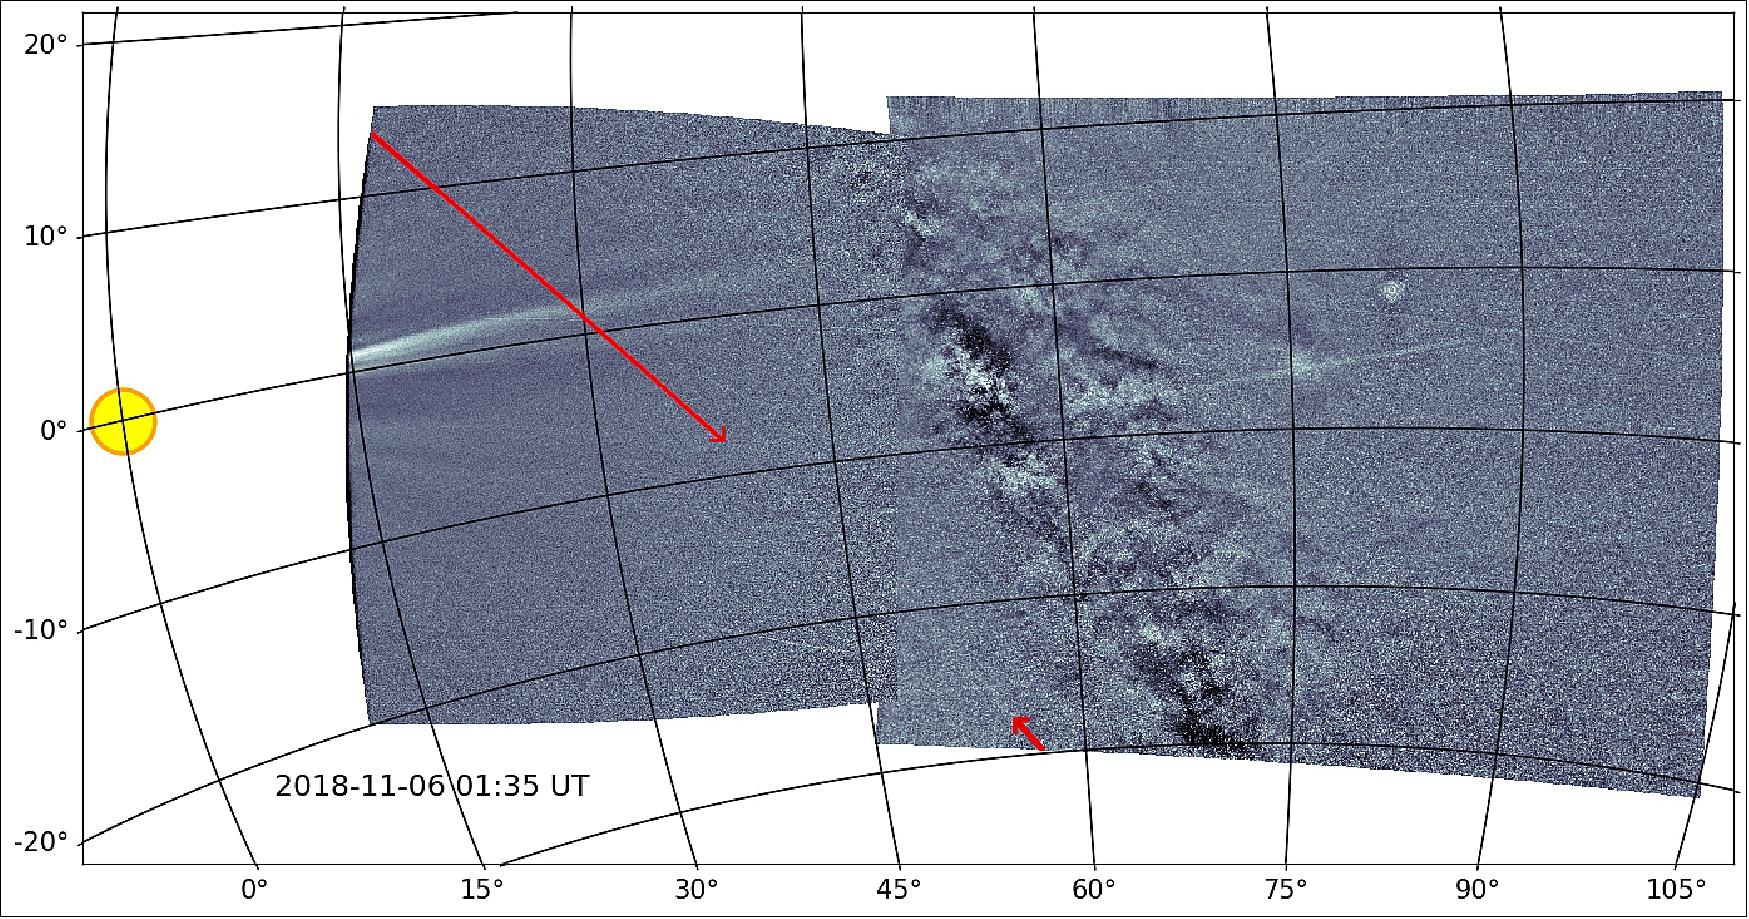 Figure 1: Parker Solar Probe's WISPR instruments captured the first-ever view of a dust trail in the orbit of asteroid Phaethon. This dust trail creates the Geminids meteor shower, visible each December (image credit: Brendan Gallagher/Karl Battams/NRL)